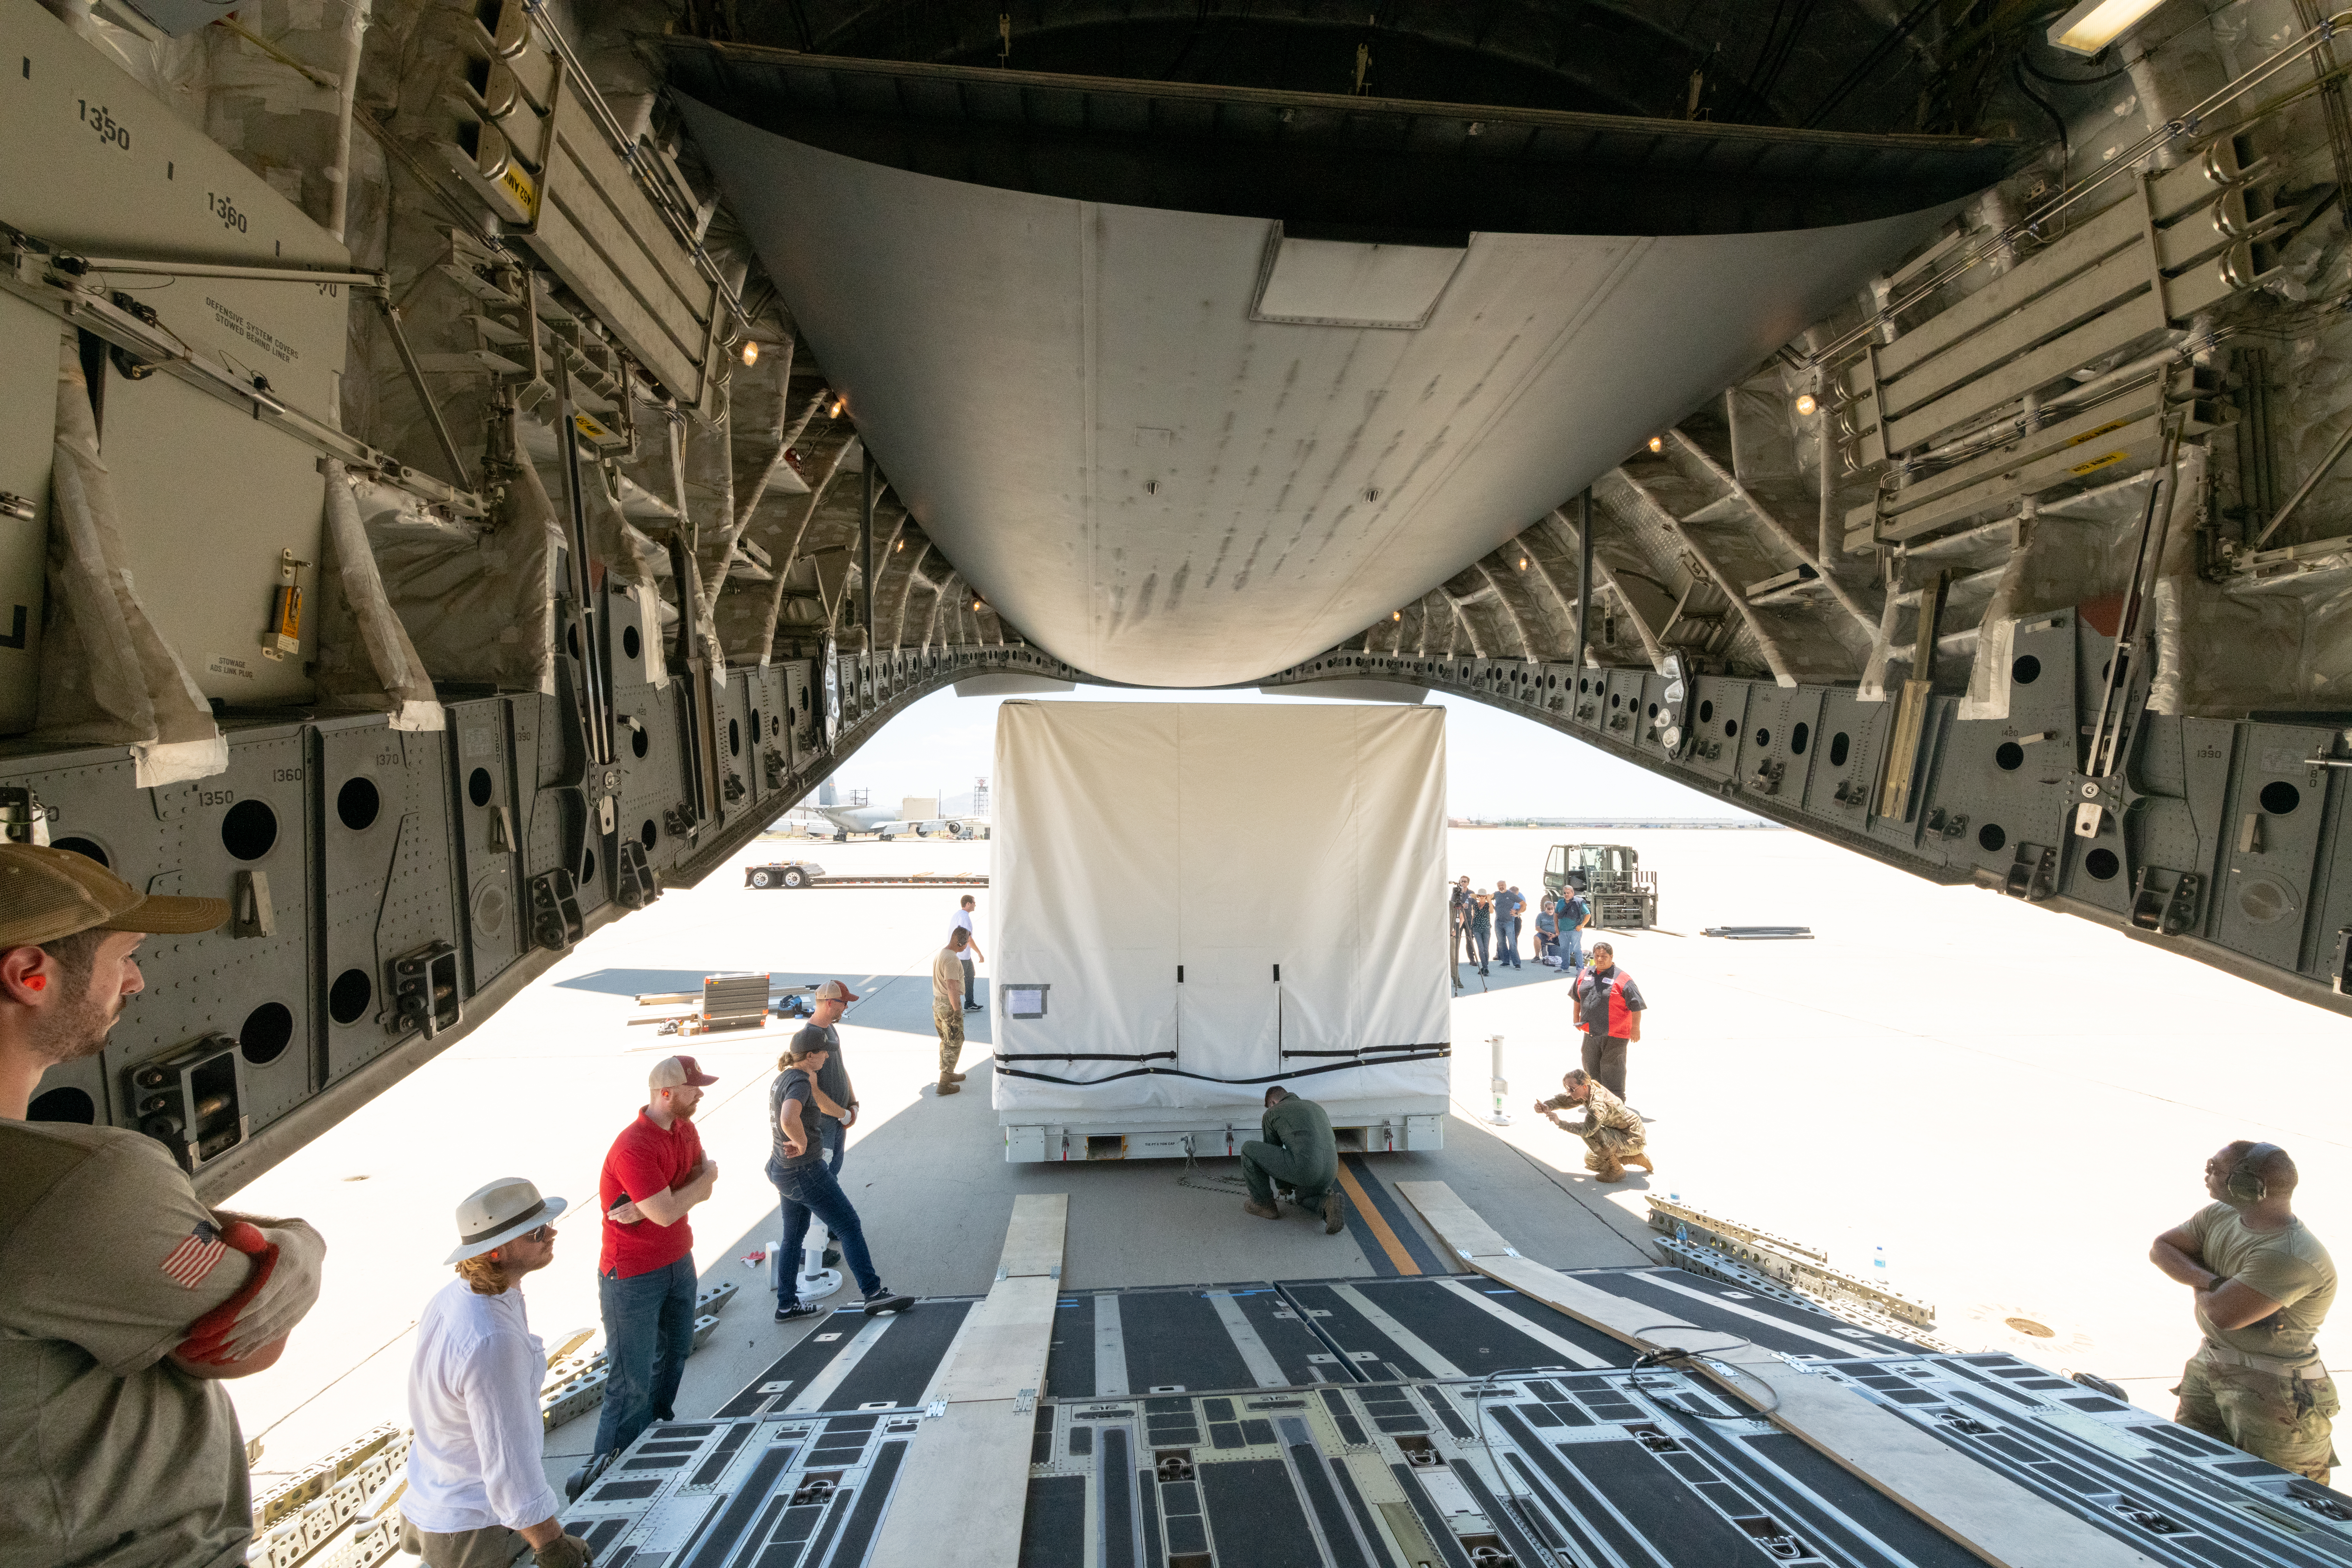 A view from inside the plane as the SWOT instrument is being loaded on.